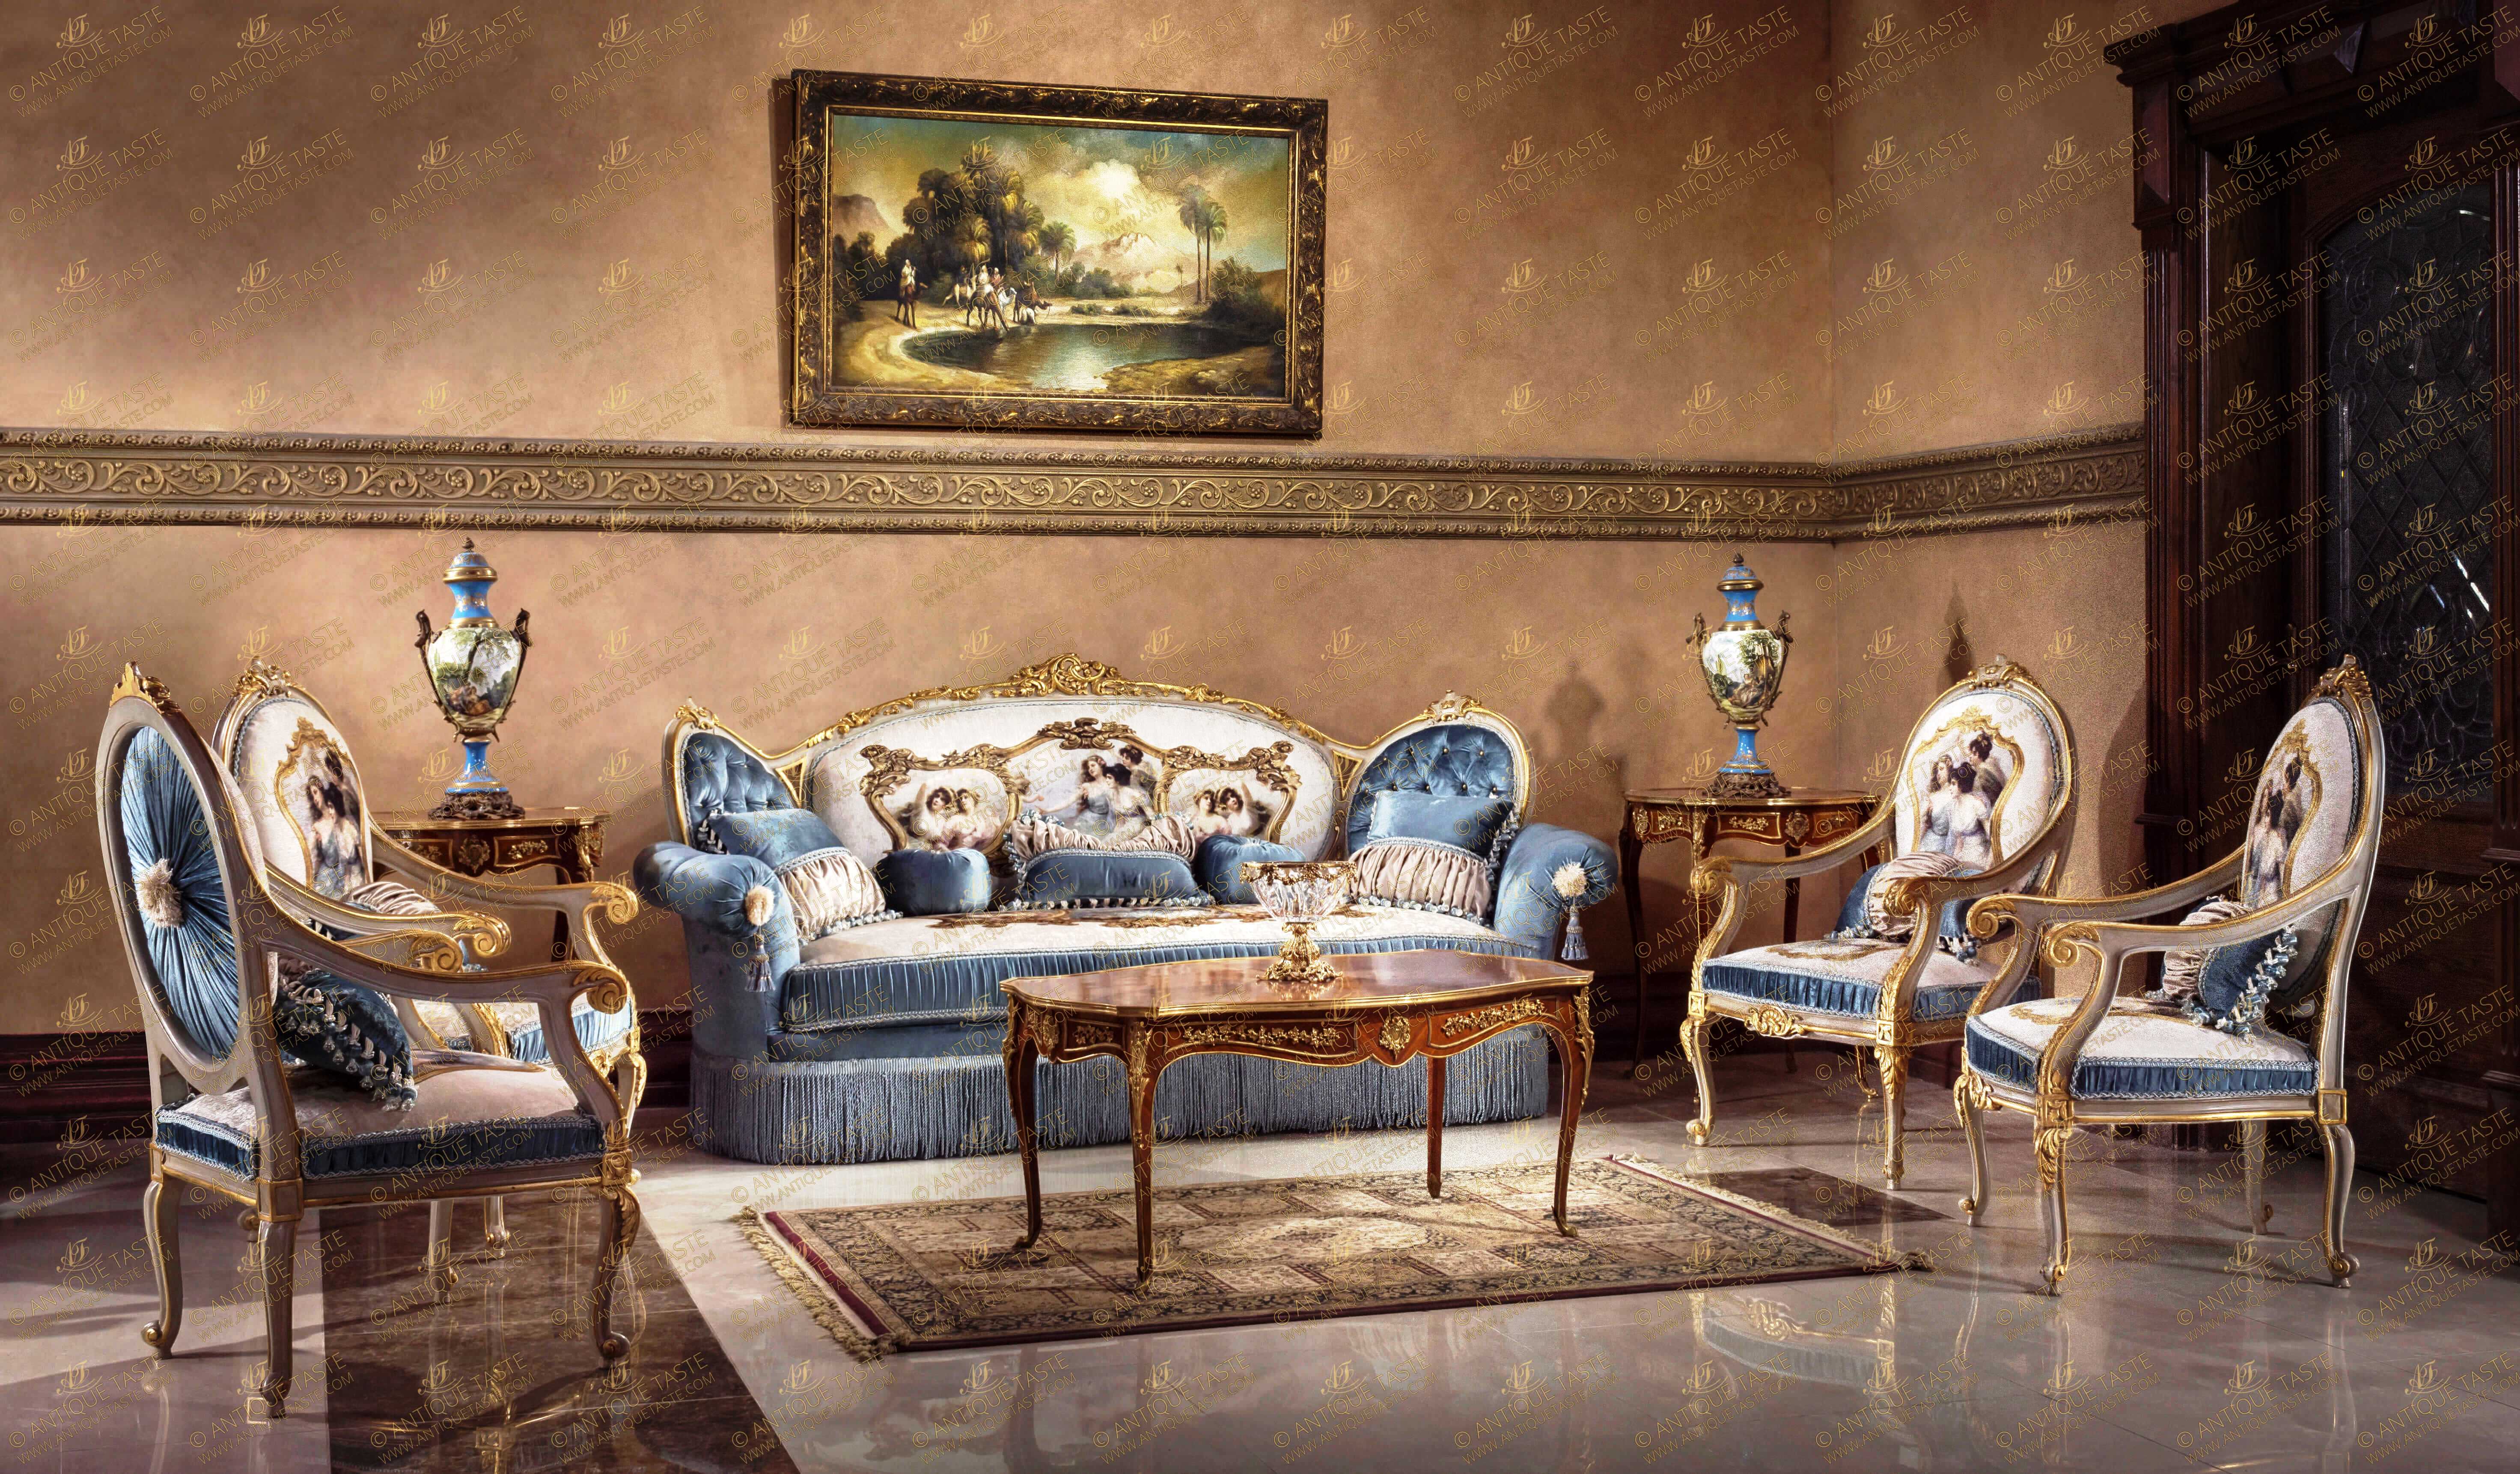 A captivating Luxury French Louis XV Rococo style five pieces Royal Sofa Suite of one sofa and four armchairs; hand carved, Shabby Chic painted and French foil parcel gilded, upholstered with sensational court scenes fabric, tassels and royal blue velvet; ornamented with scrolling pierced C works, Rococo foliage elements, shells, acanthus leaves, oak leaves, volutes and a carved Cabushon on each top.